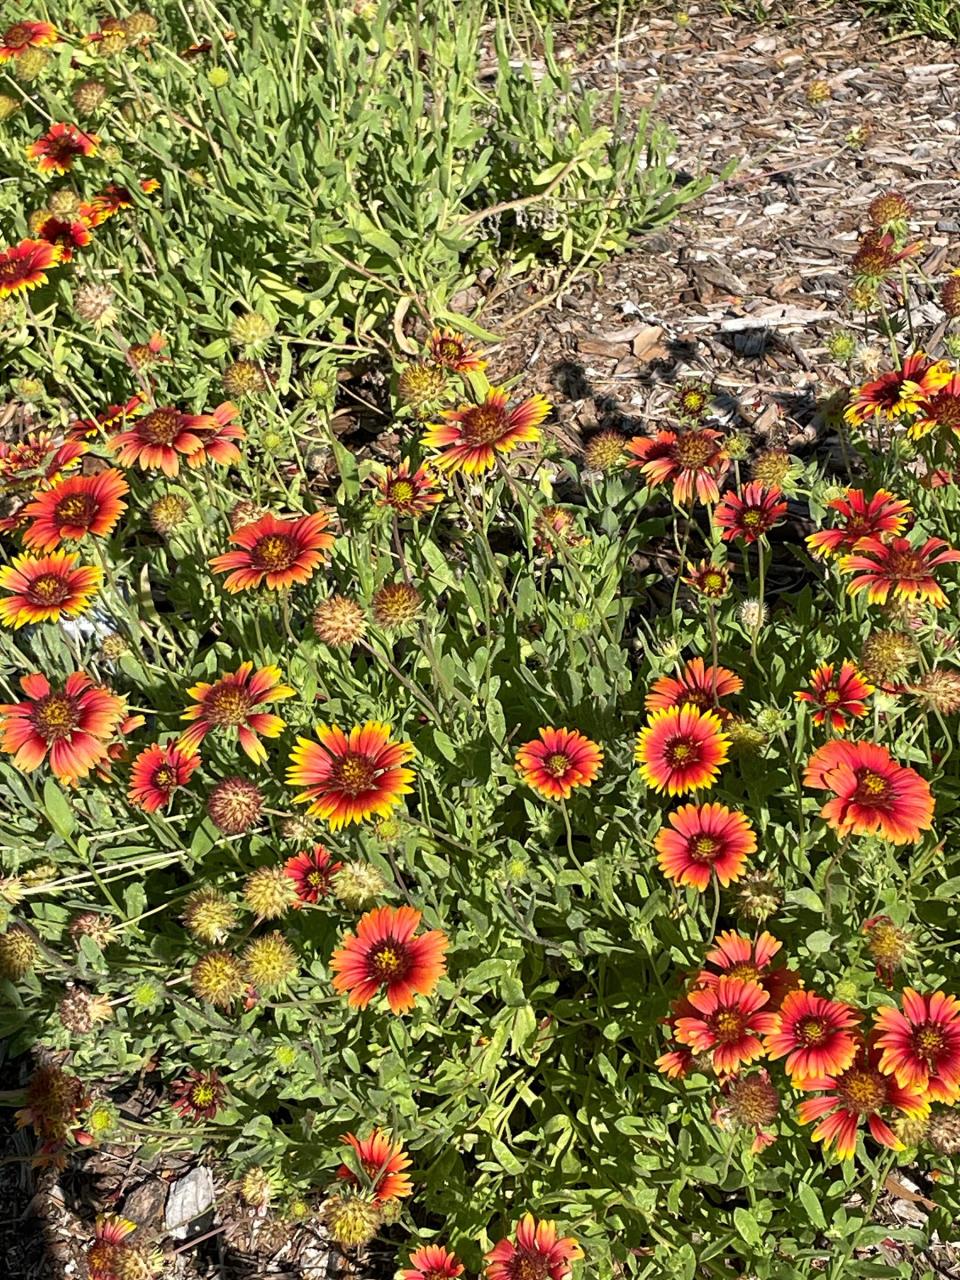 Low maintenance pollinator plants can add beauty and excitement to the garden by attracting bees, butterflies, and birds. These include Indian Blanket.